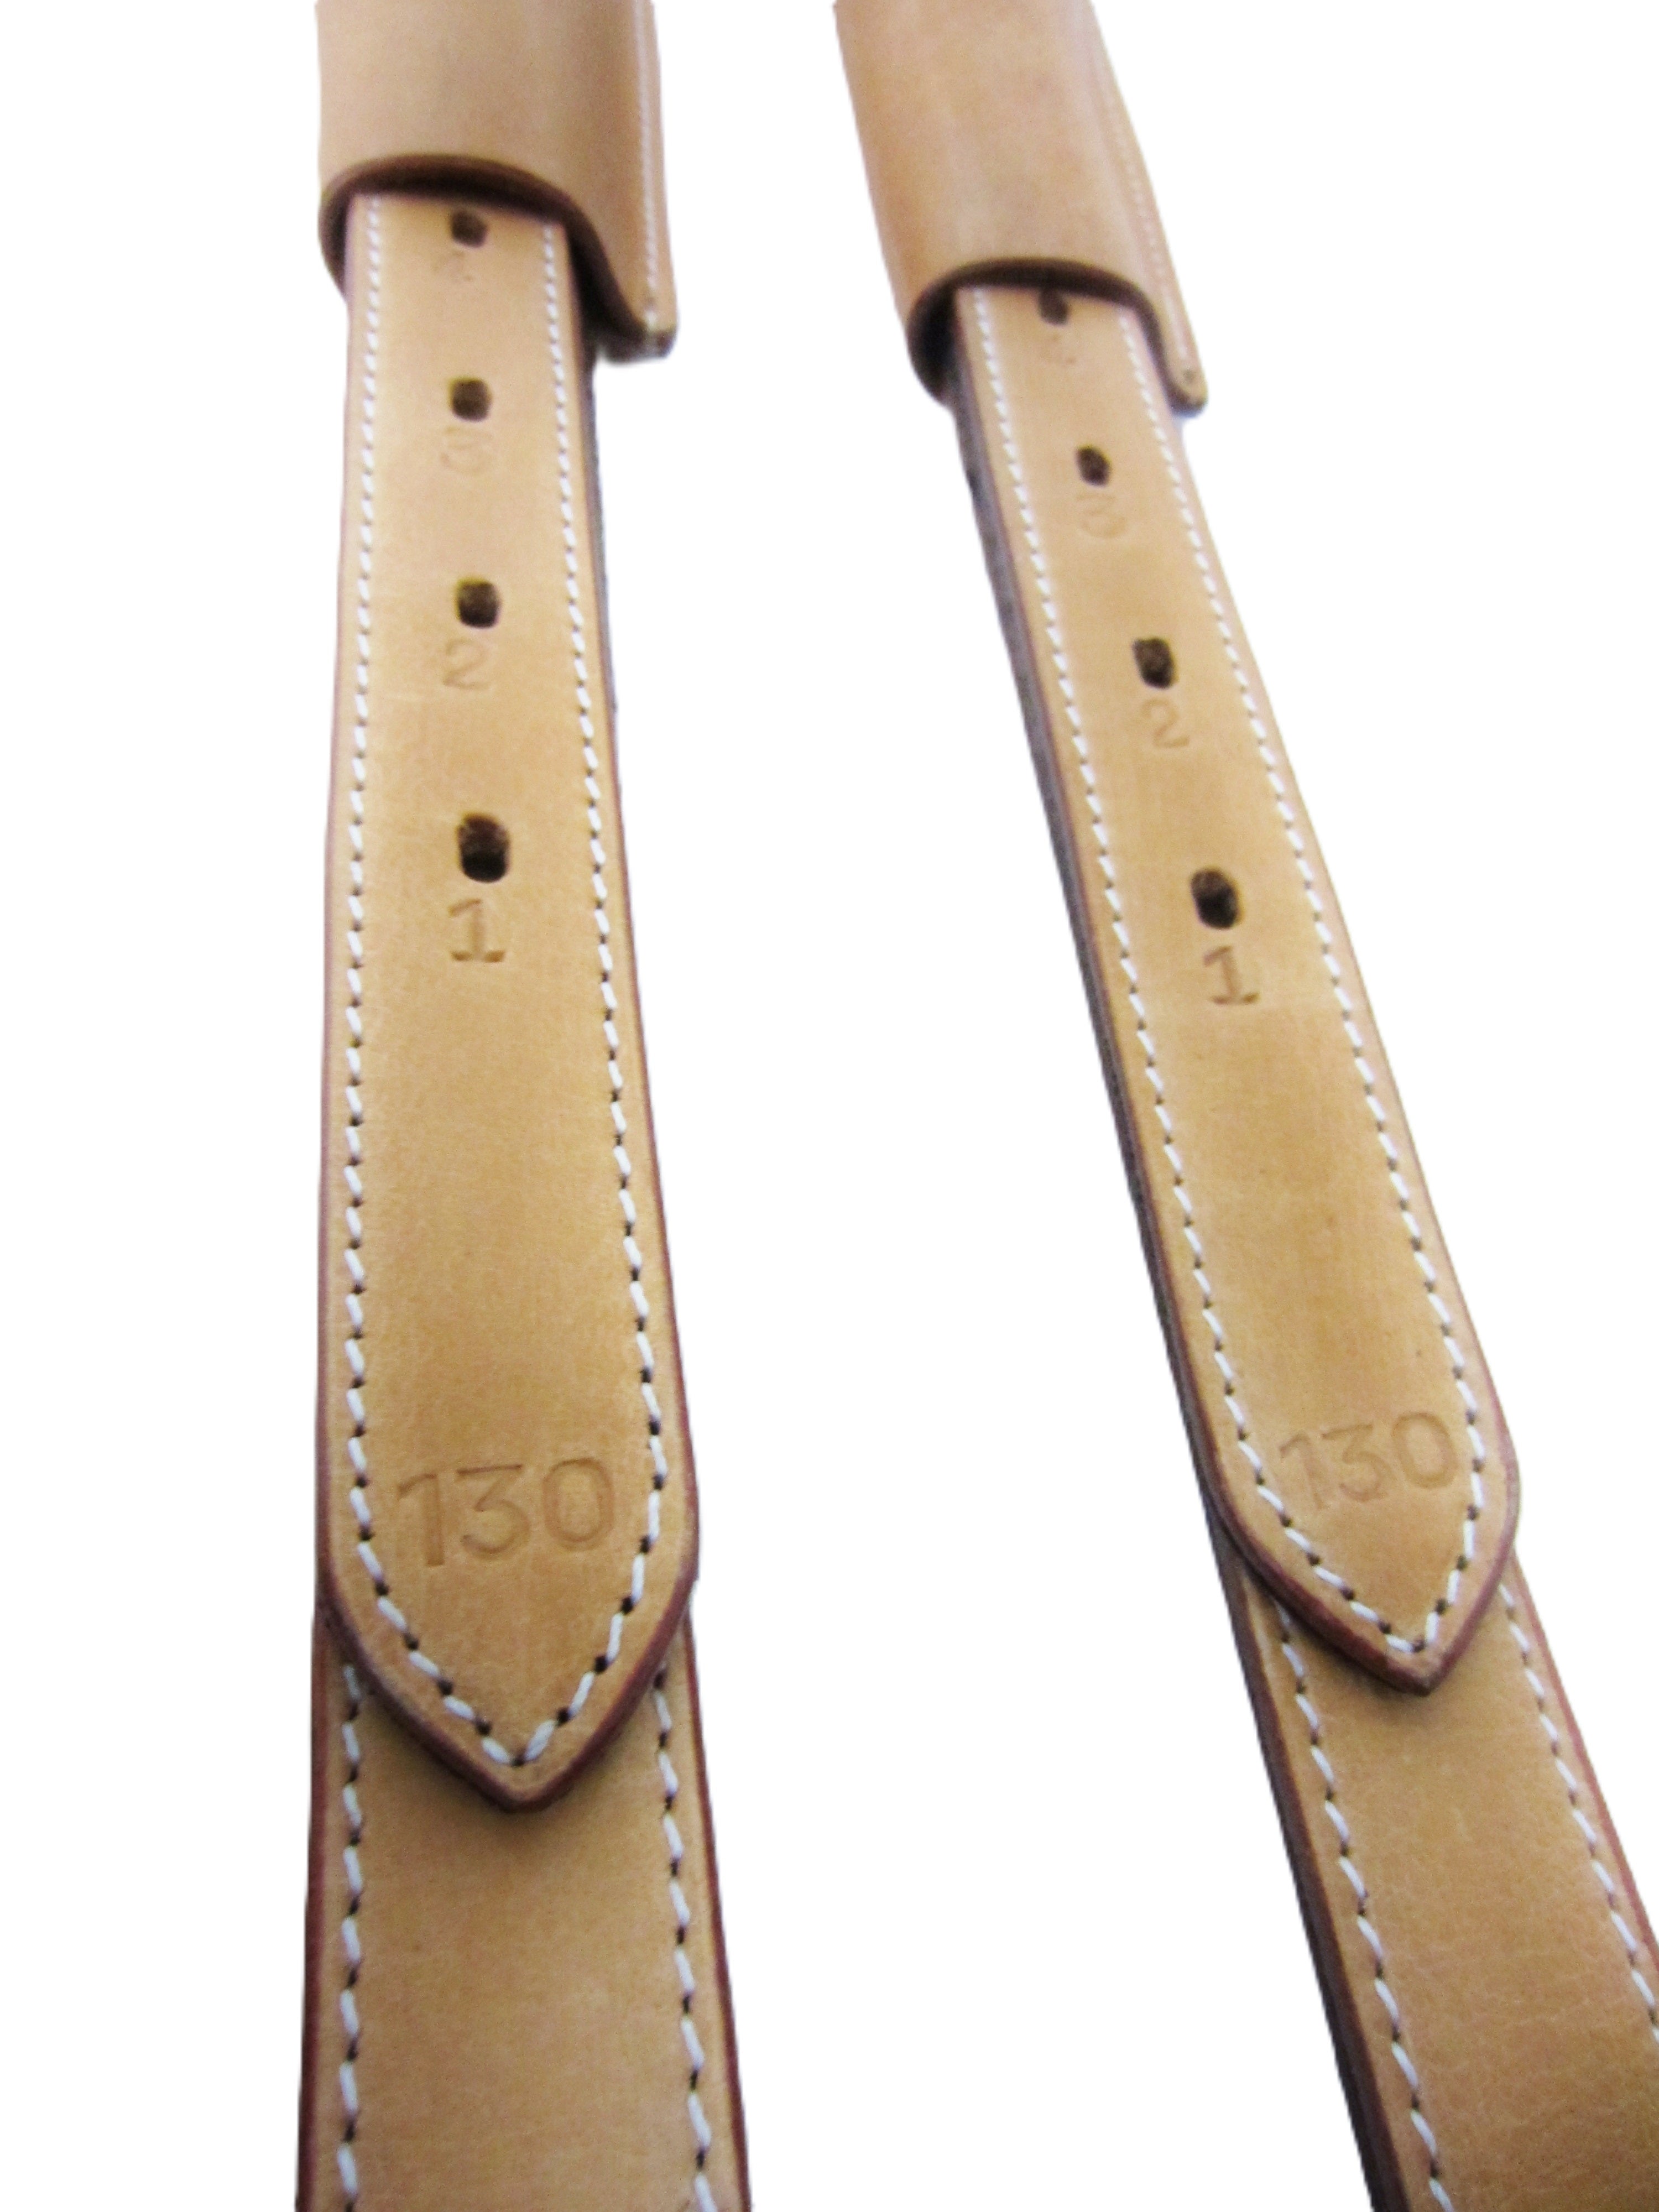 Pair of English stirrup leathers with 2.5 cm width - color - natural / beige / cognac